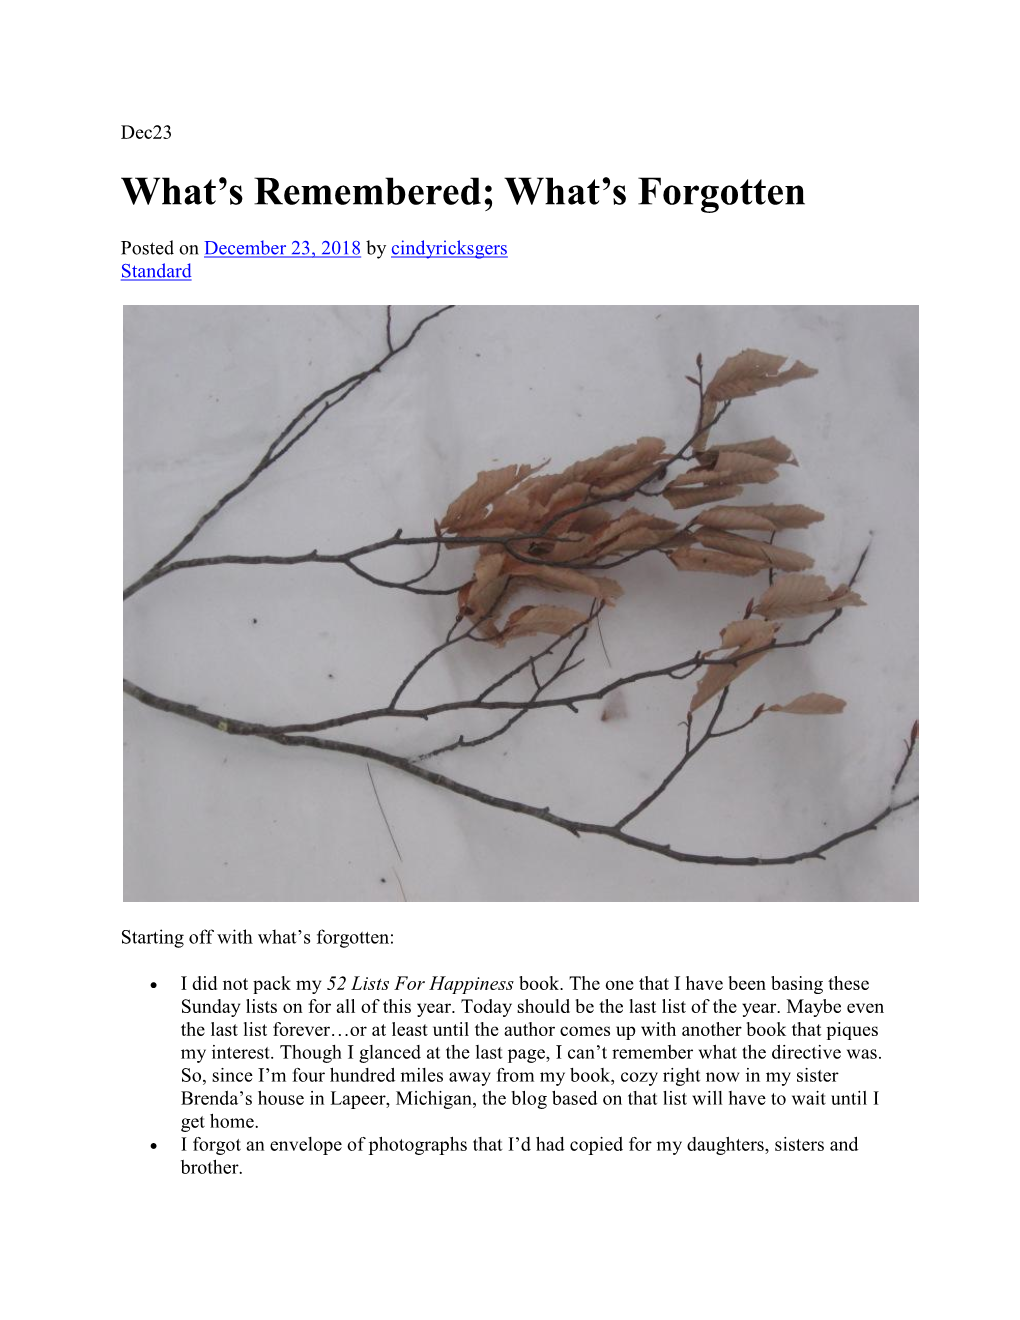 What's Remembered